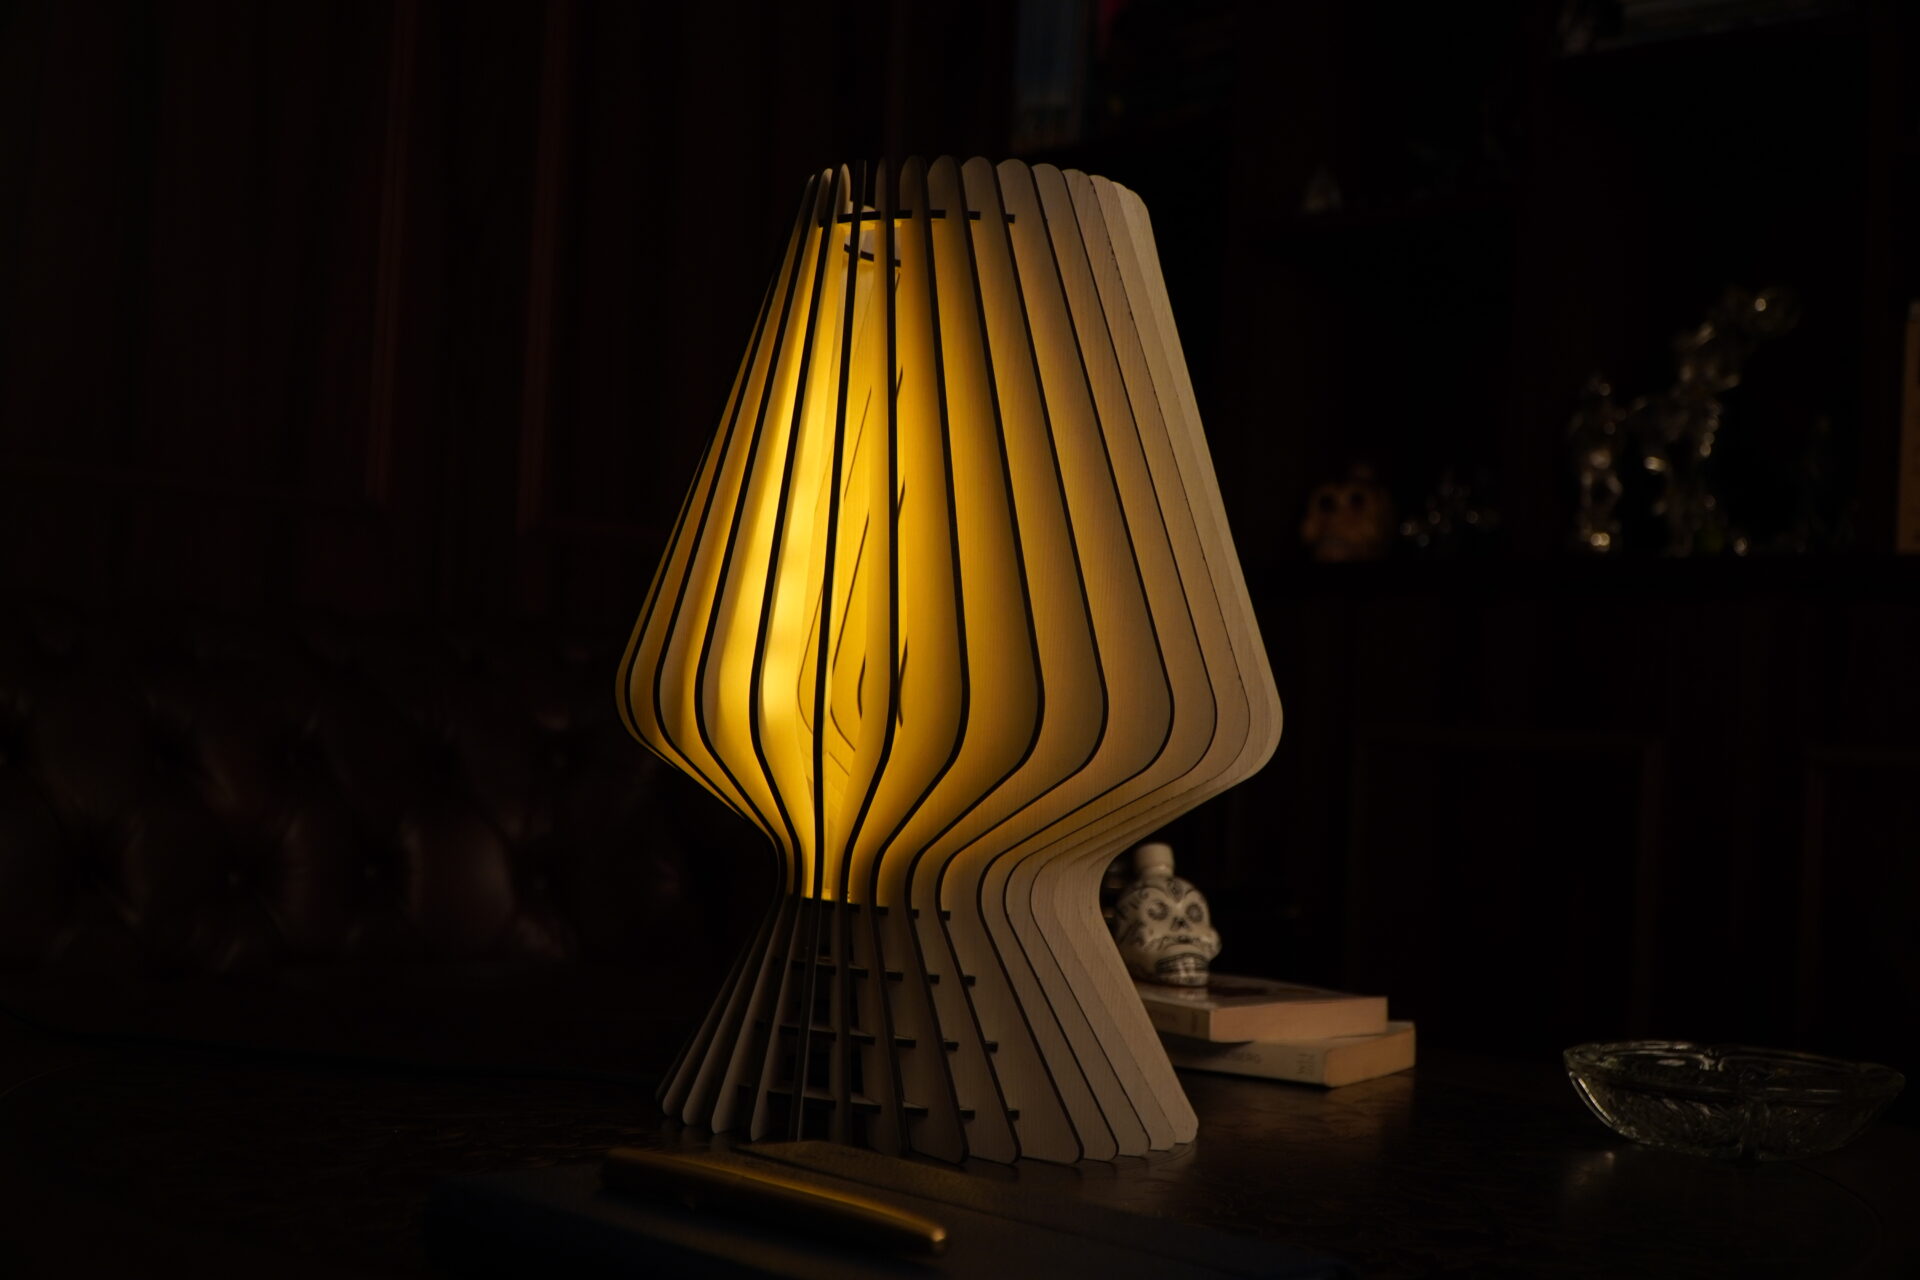 Aesthetic table lamp with unique design, perfect for office decor furniture , bedroom decor and home decor